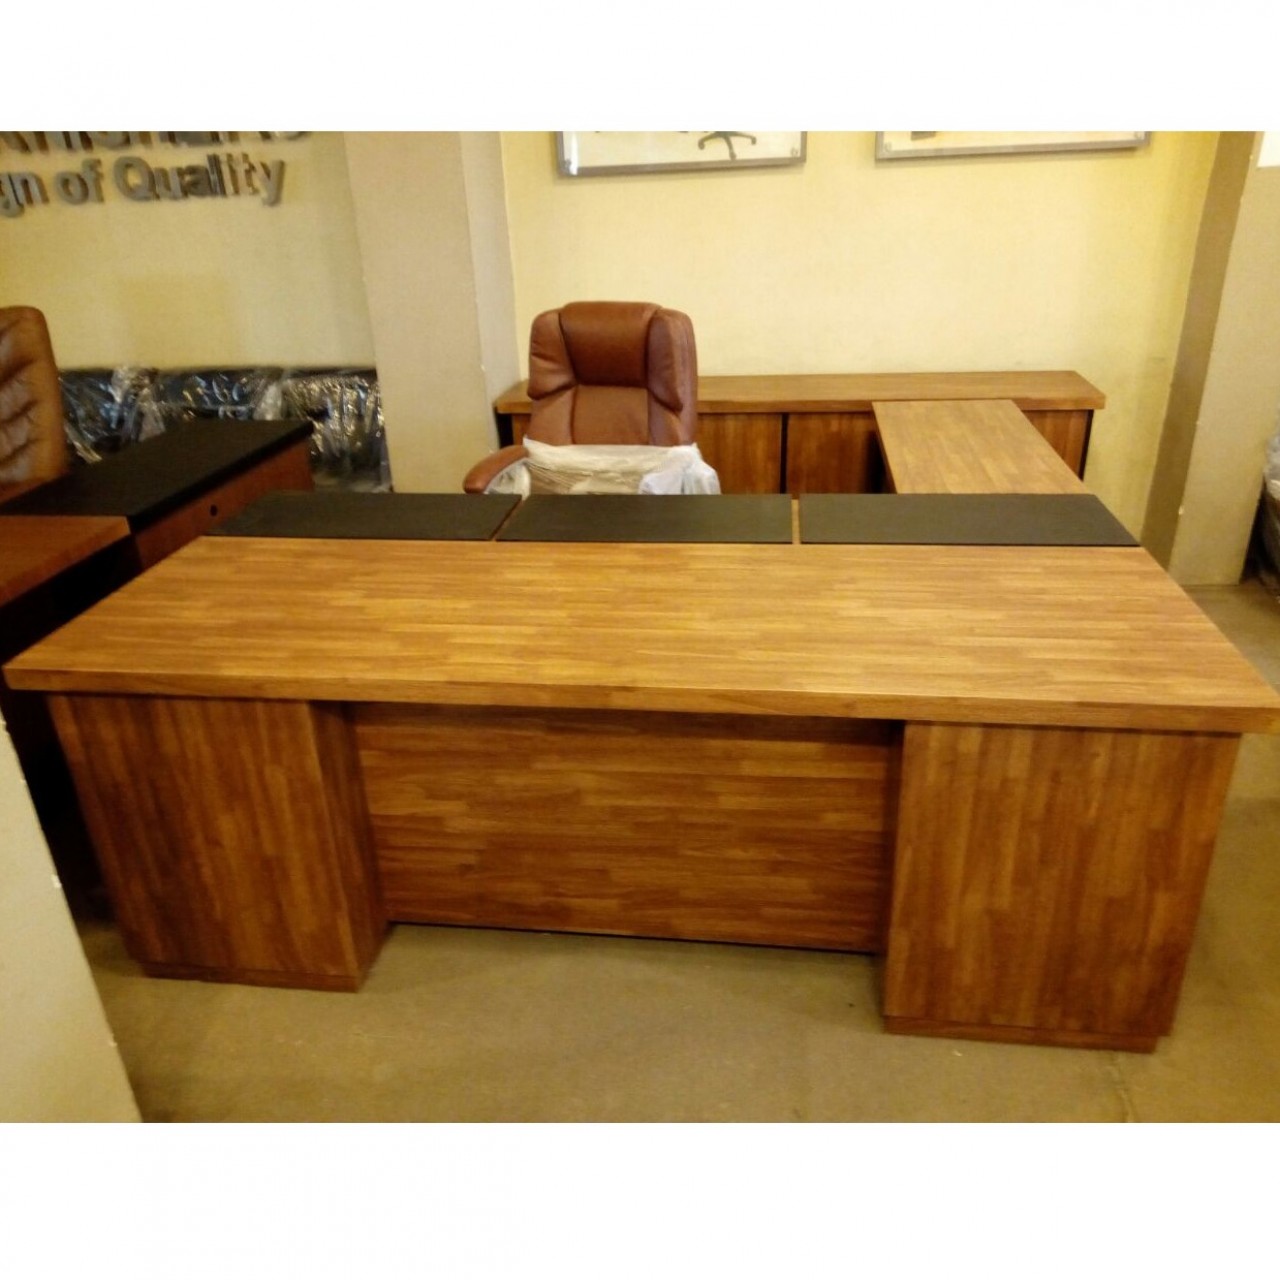 MDF & PVC Executive Office Table Set With Rack - Move able & Folding Table